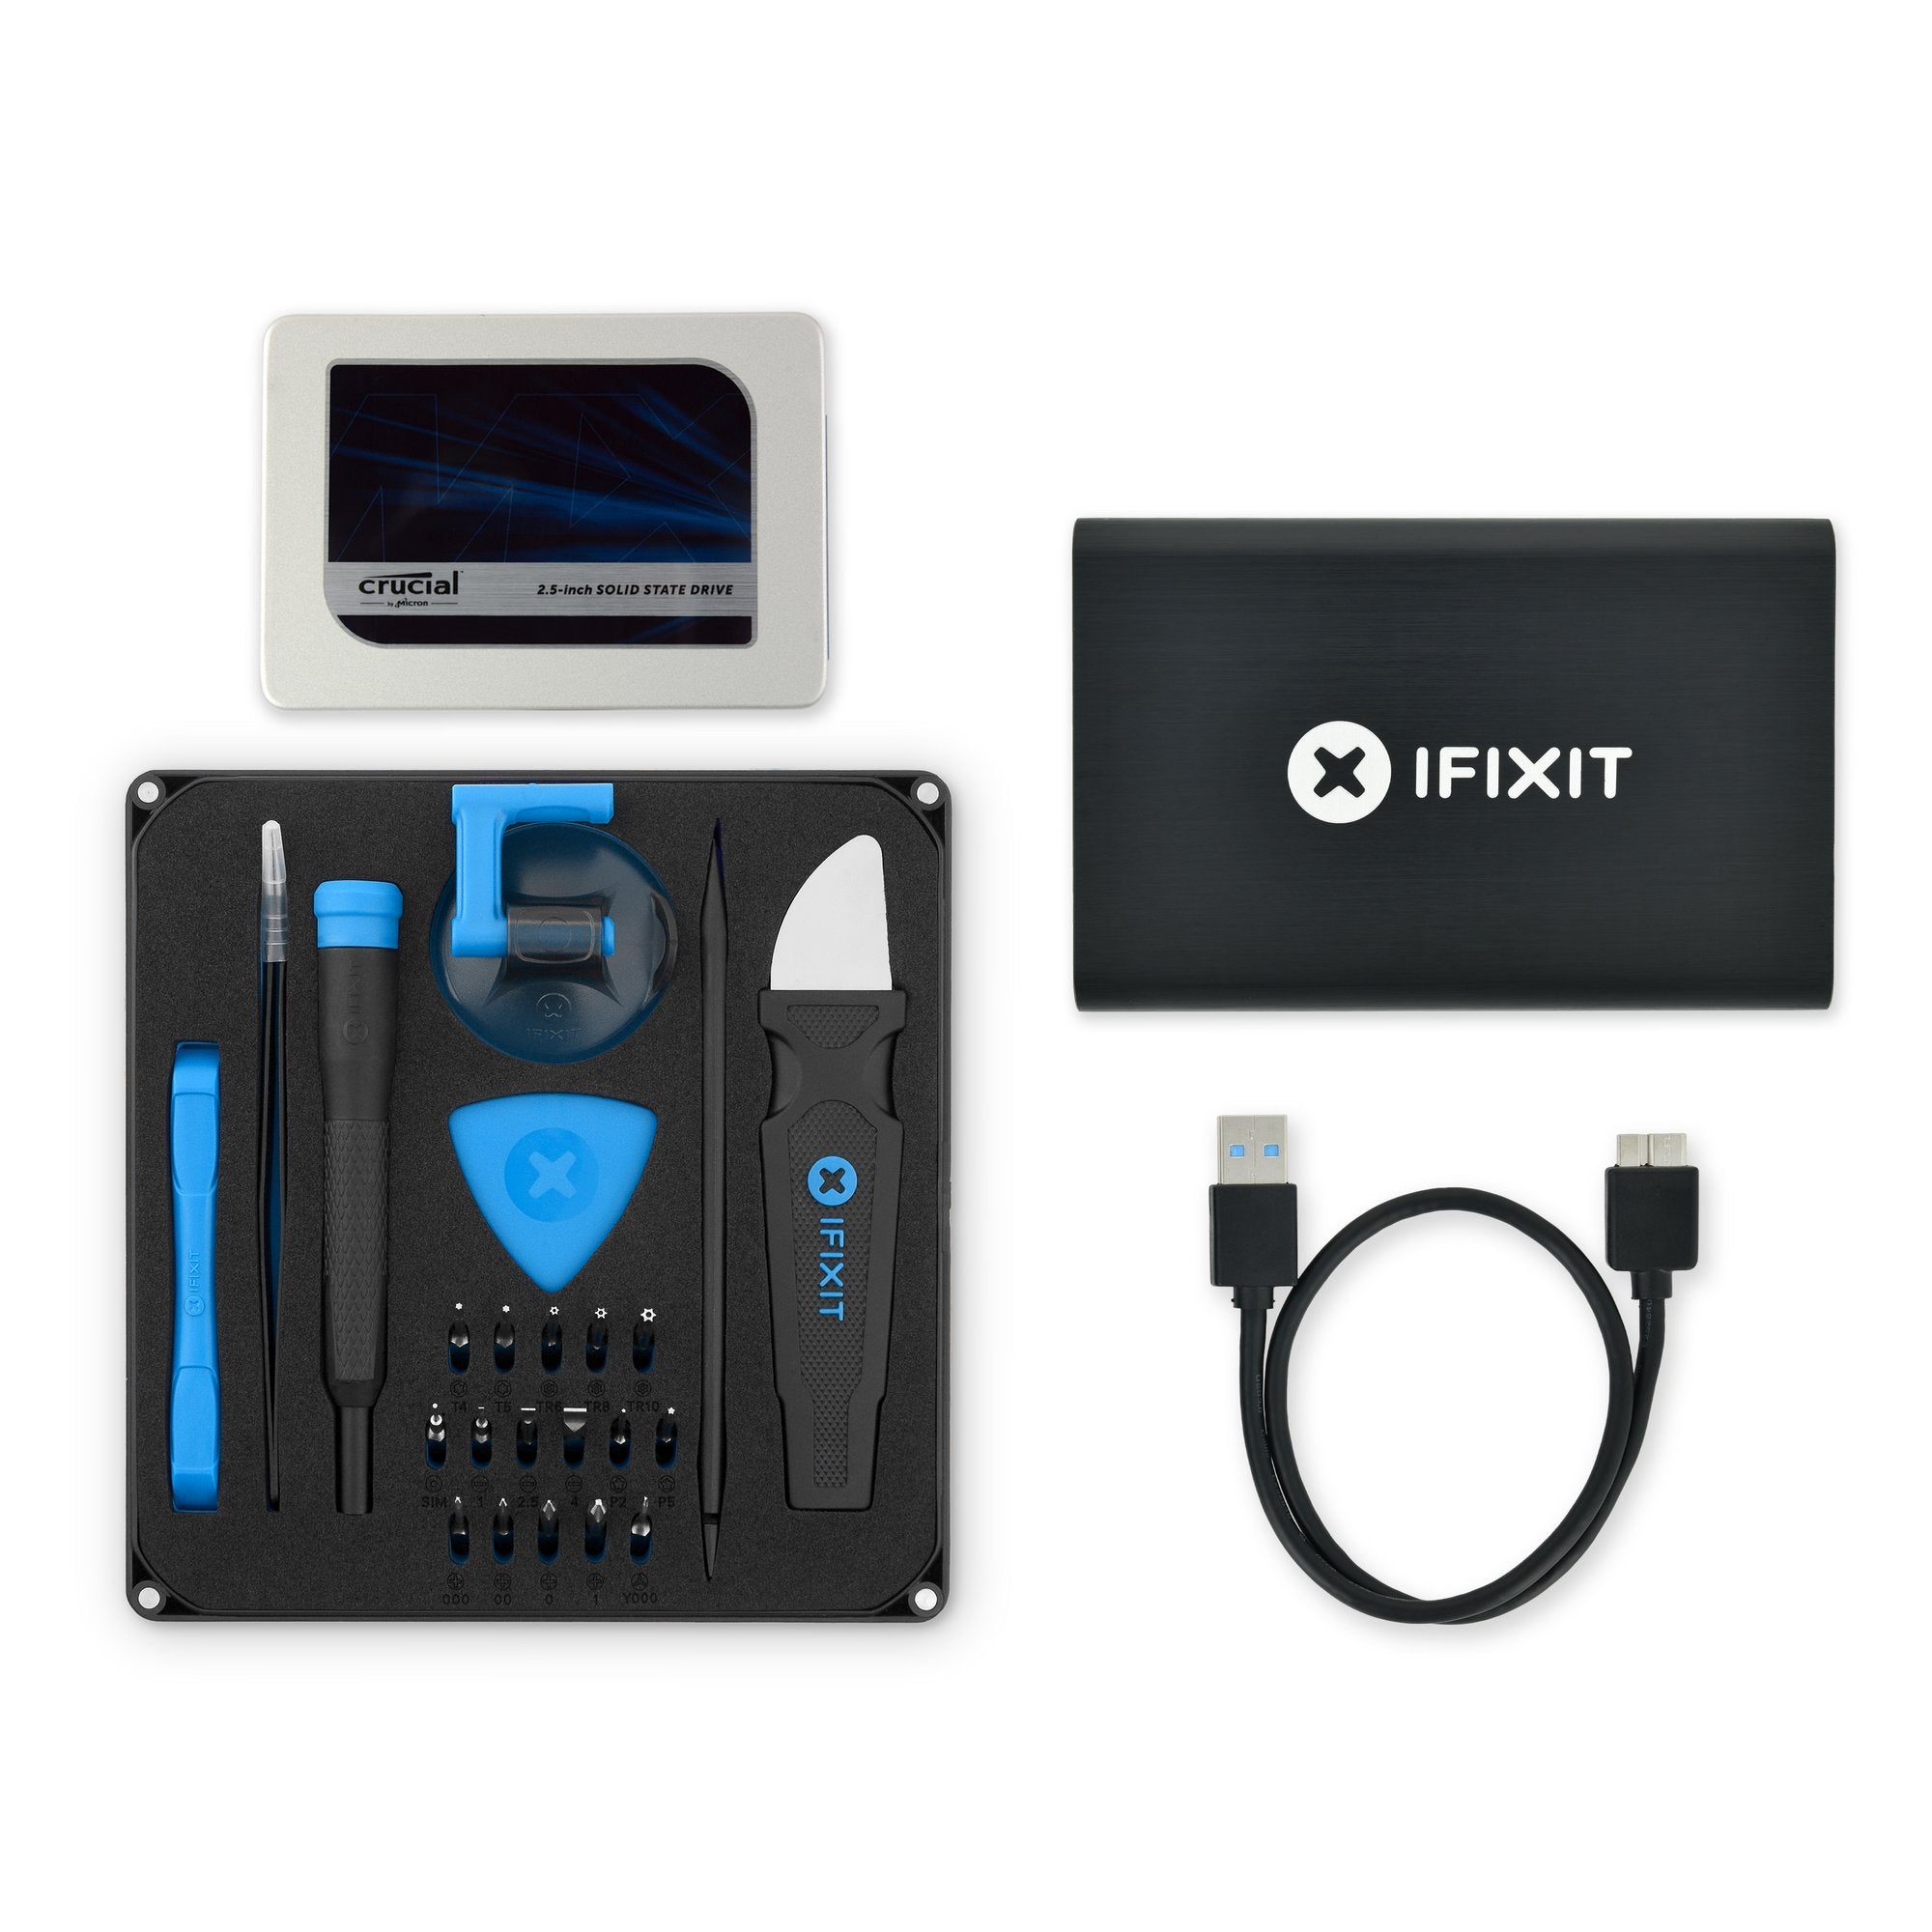 Crucial MX500 500 GB SSD—Your complete iFixit Fix Kit: a Crucial